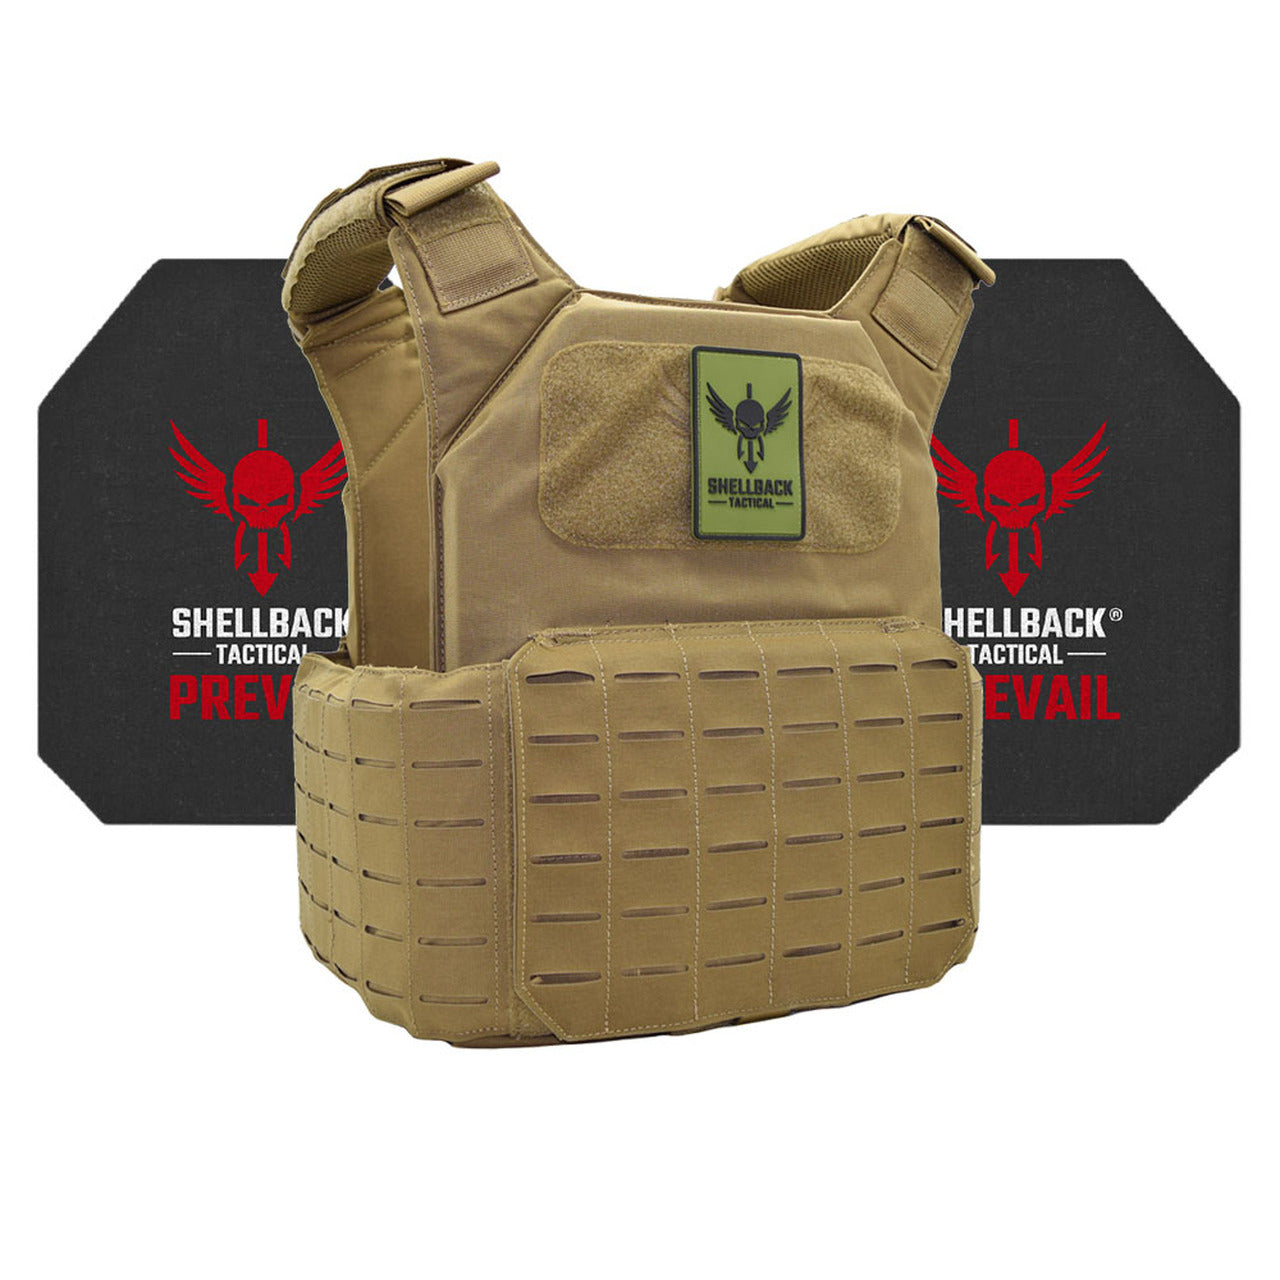 A Shellback Tactical Shield 2.0 Active Shooter Kit with Level IV 4S17 Plates plate carrier with the word shieldback on it.